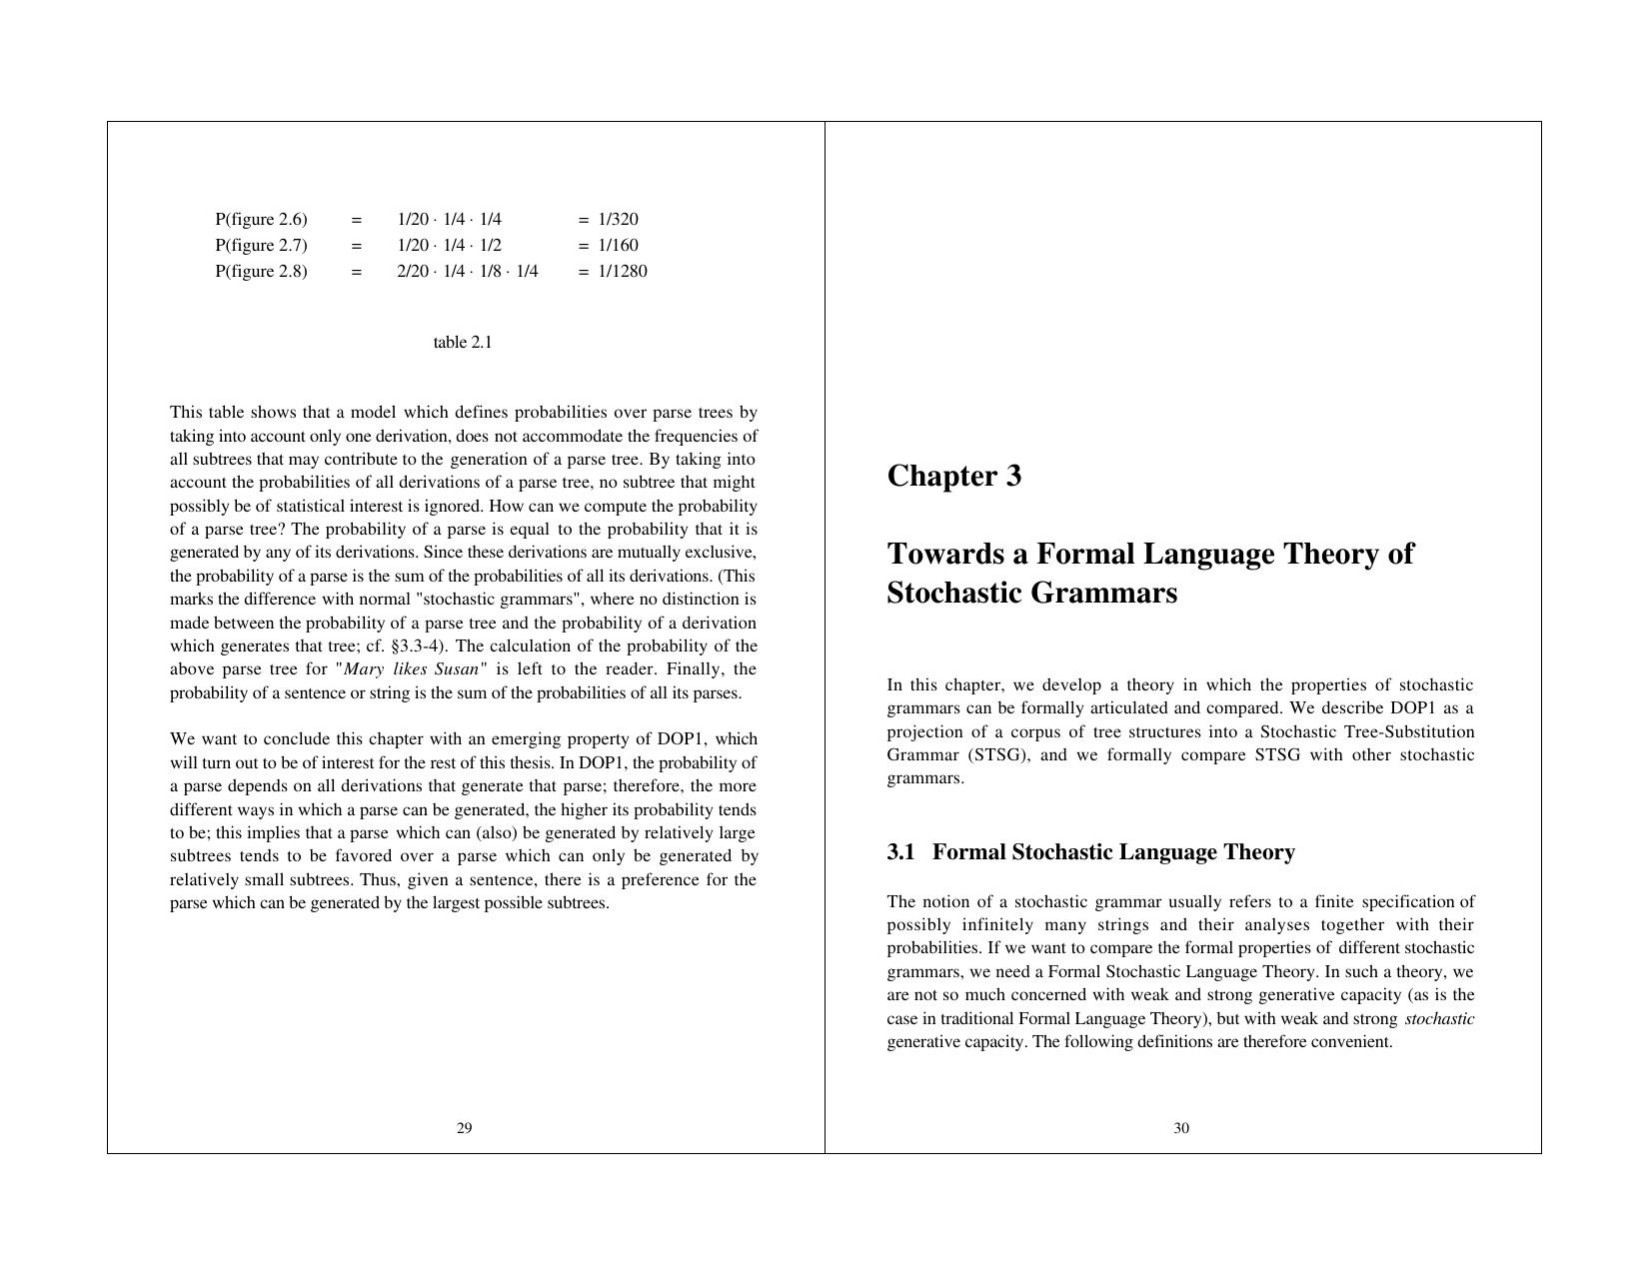 Towards a Formal Language Theory of  Stochastic Grammars - Chapter 3